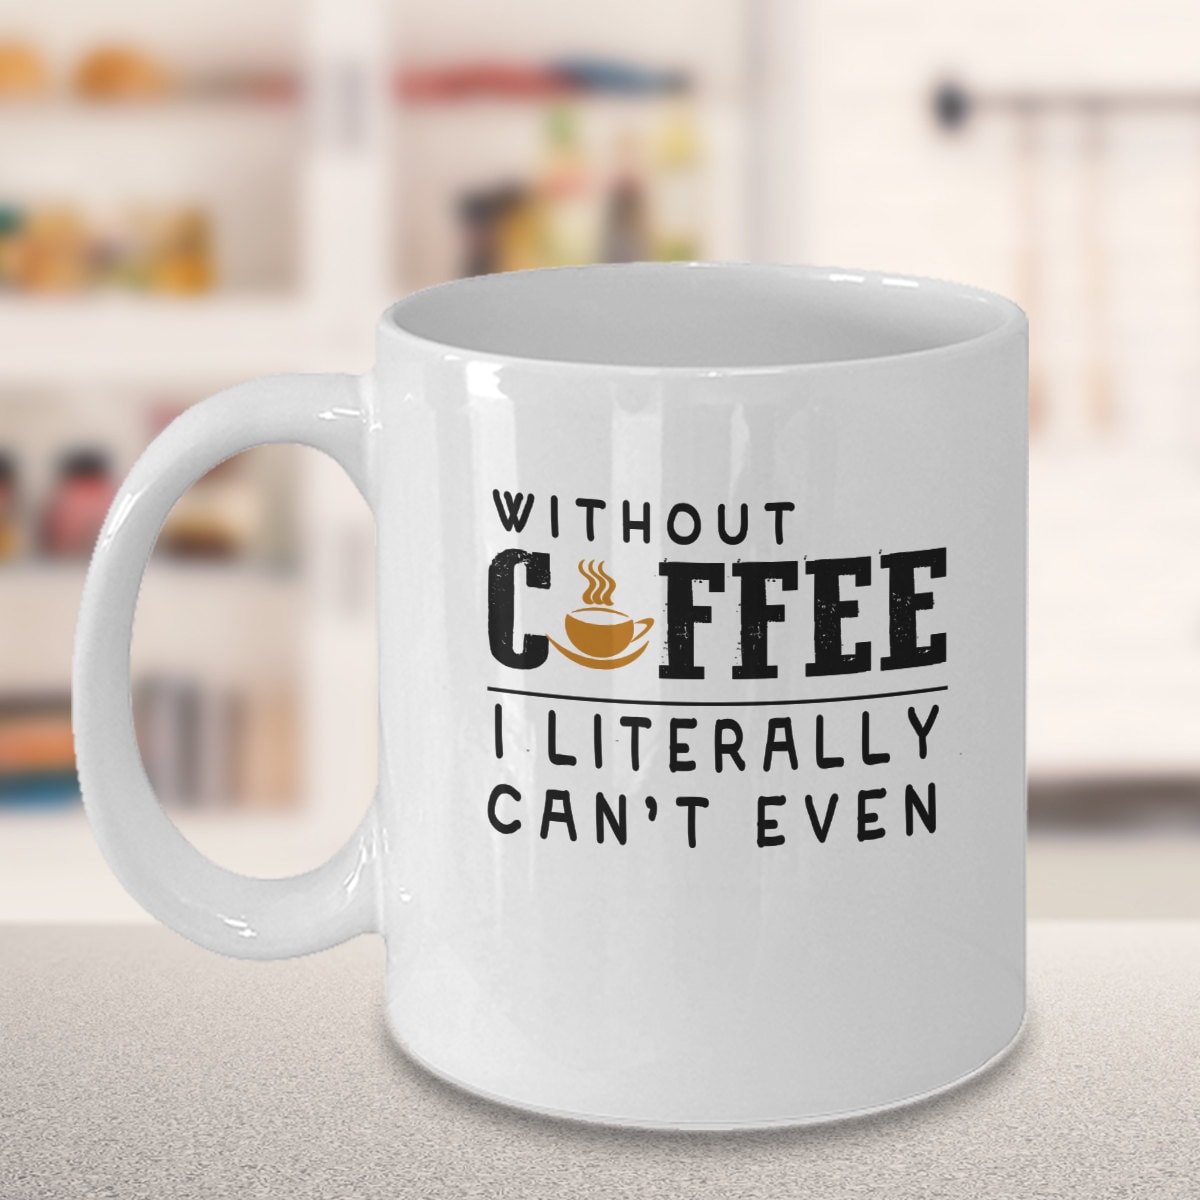 Without Coffee I Literally Can't Even funny coffee mugs